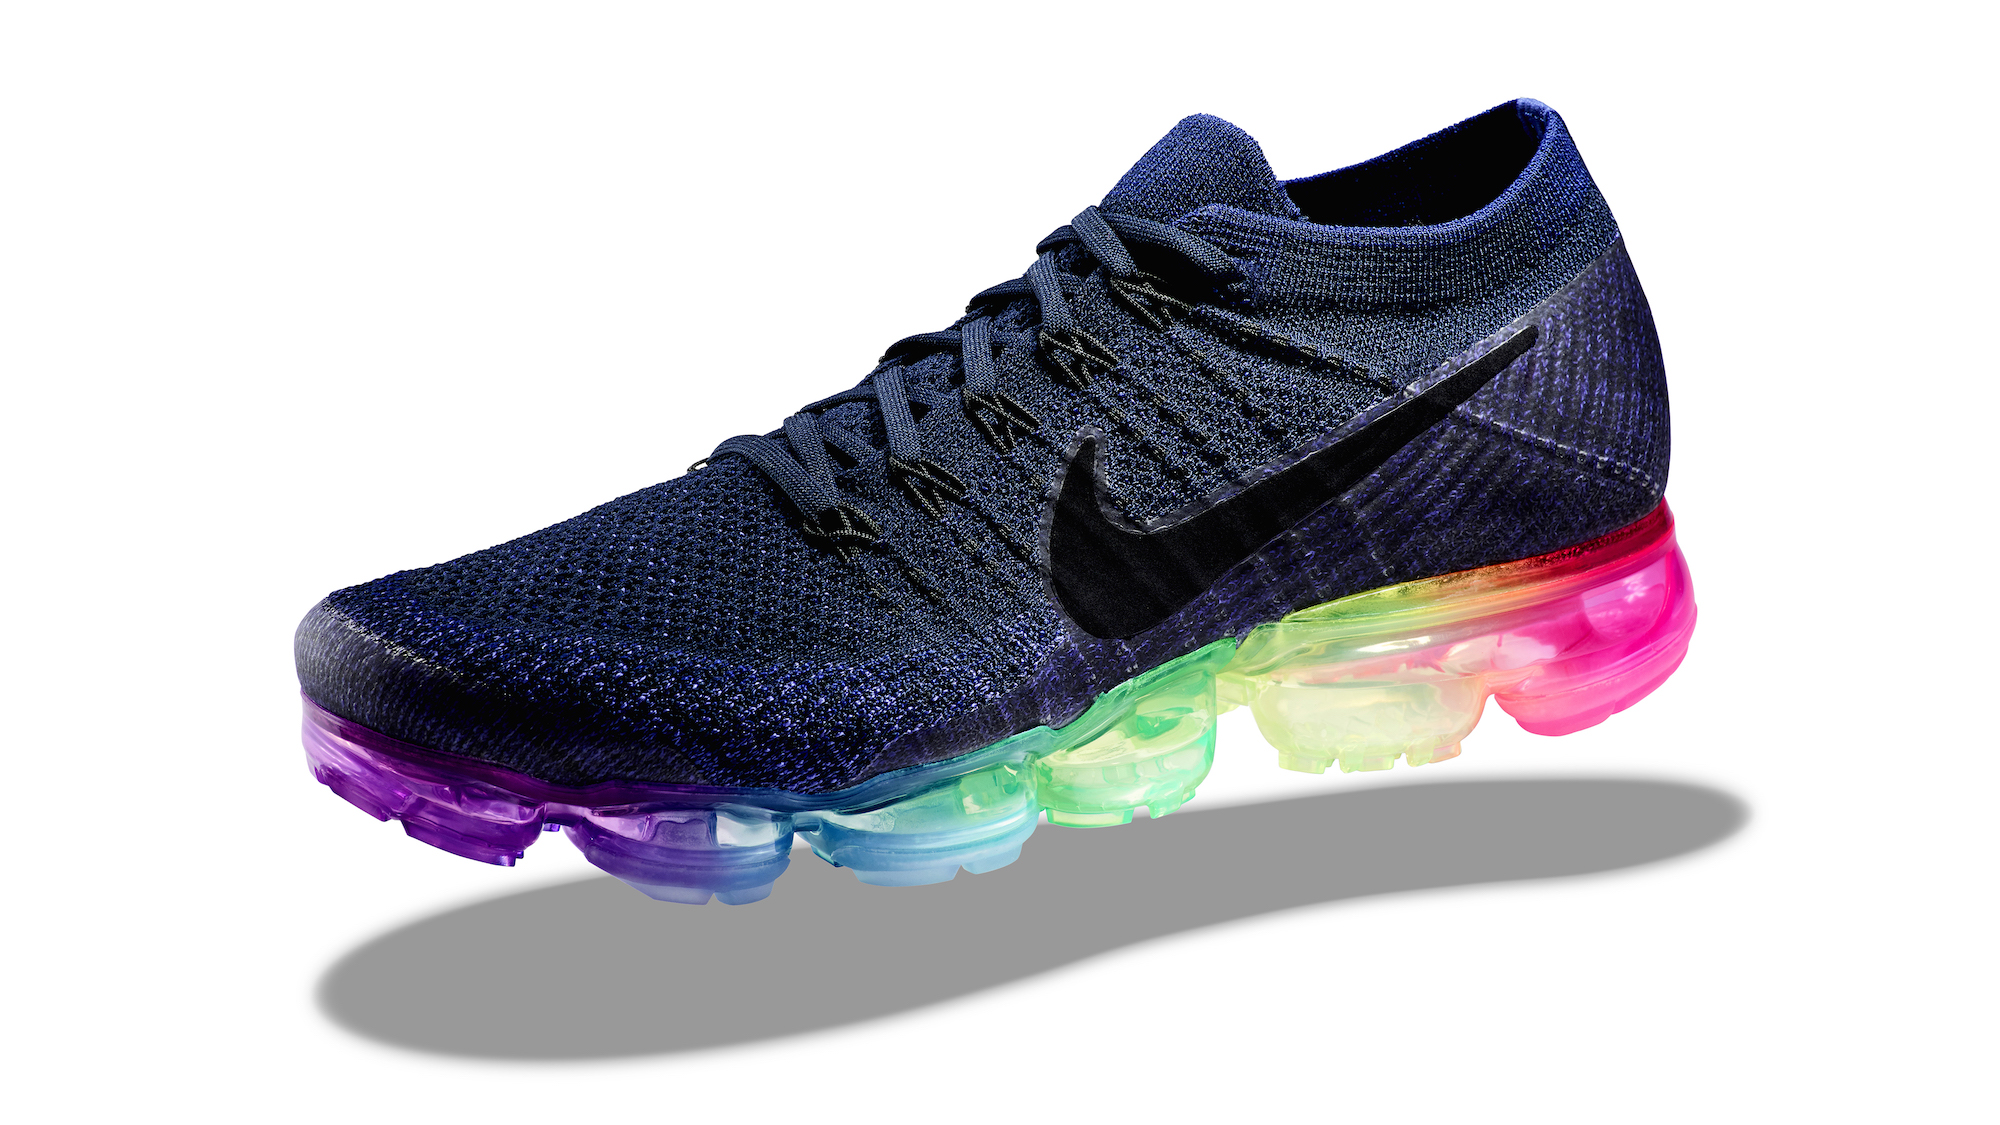 Nike's BETRUE 2017 Collection Features the VaporMax, Flyknit Racer, and